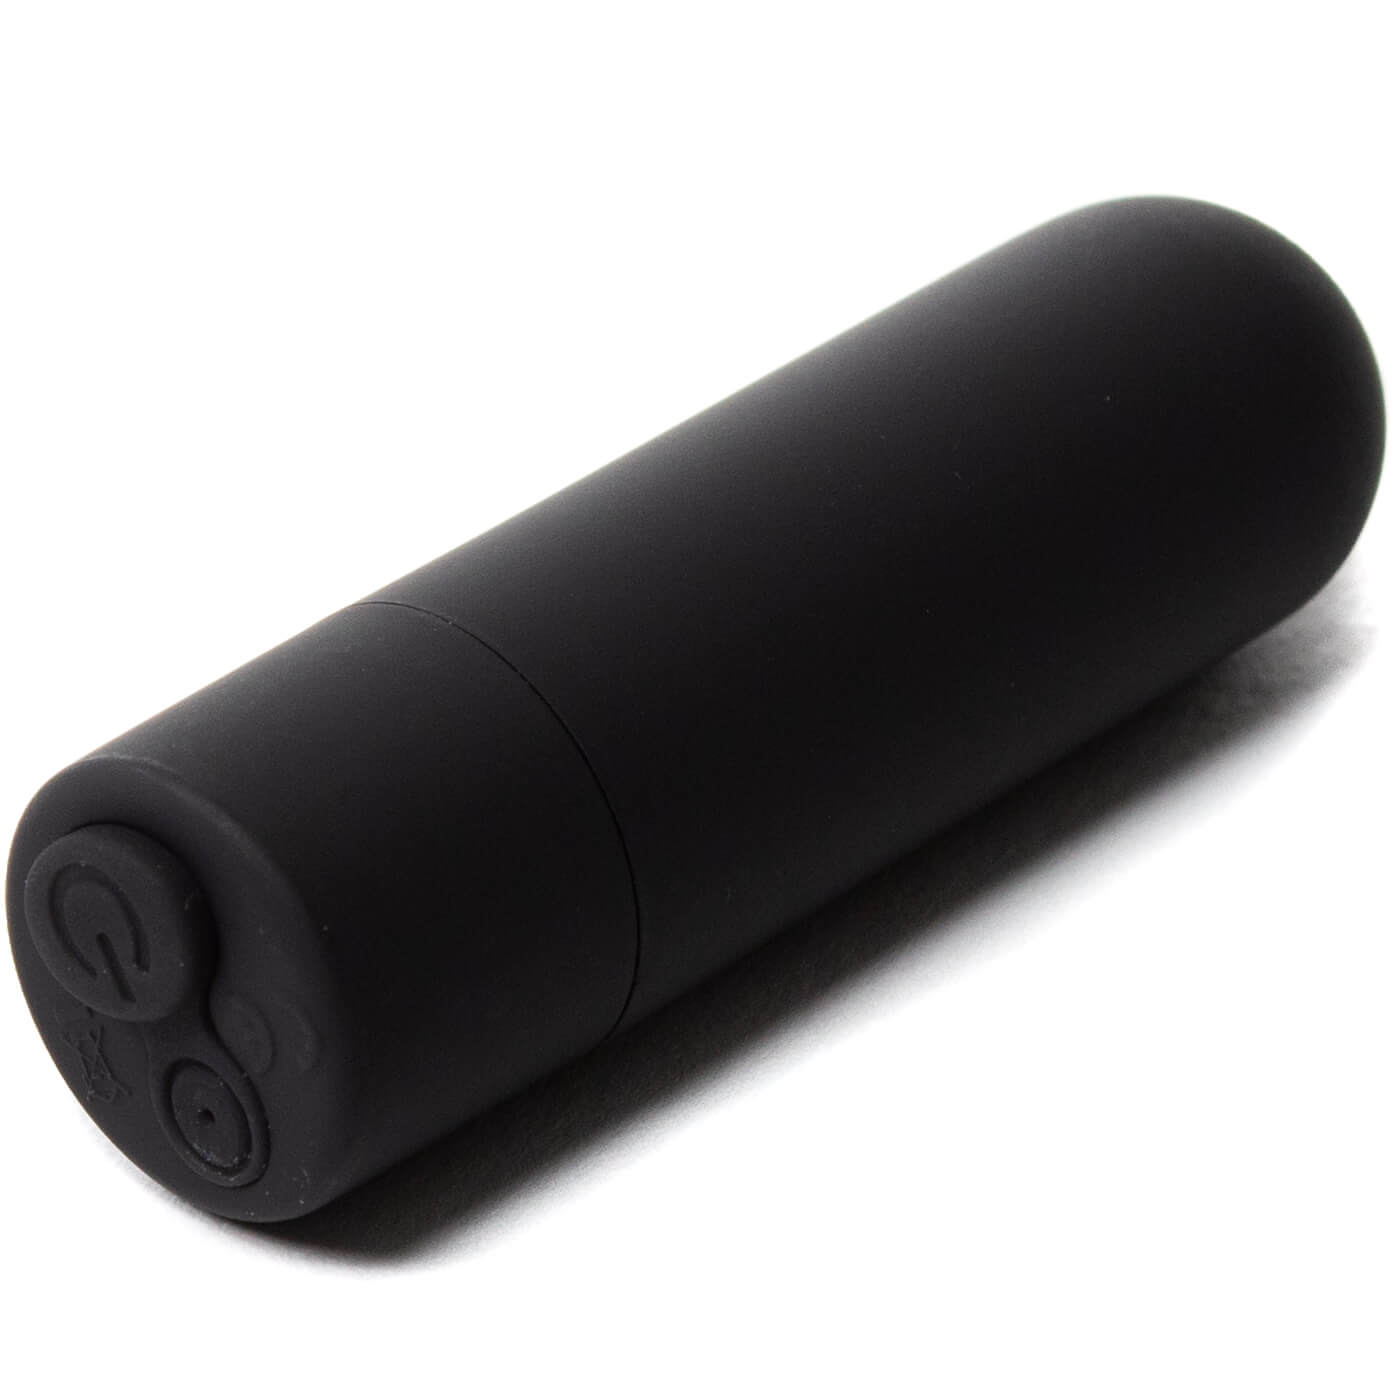 PLAY 10 Function Ultra Powerful Discreet Rechargeable Bullet Vibrator